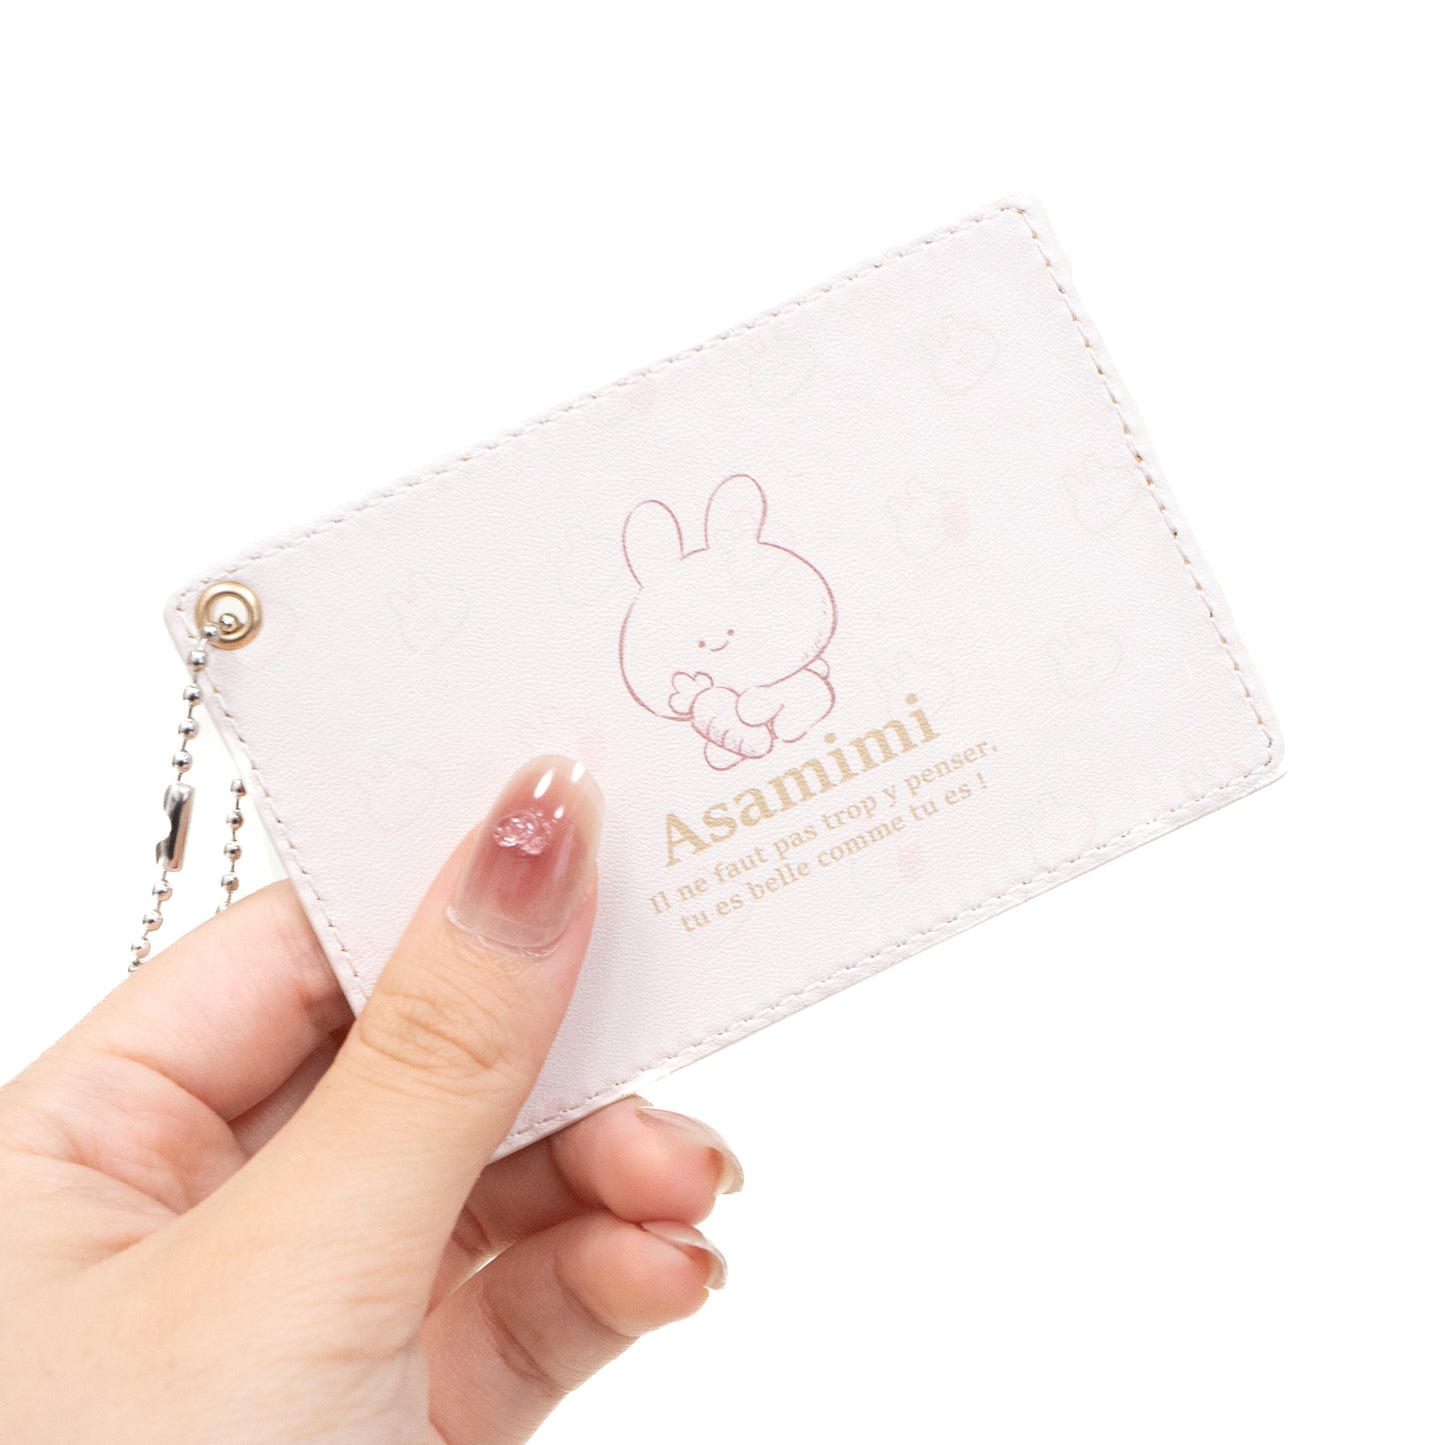 [Asamimi-chan] Pass case (French Girly) [Shipped in early December]